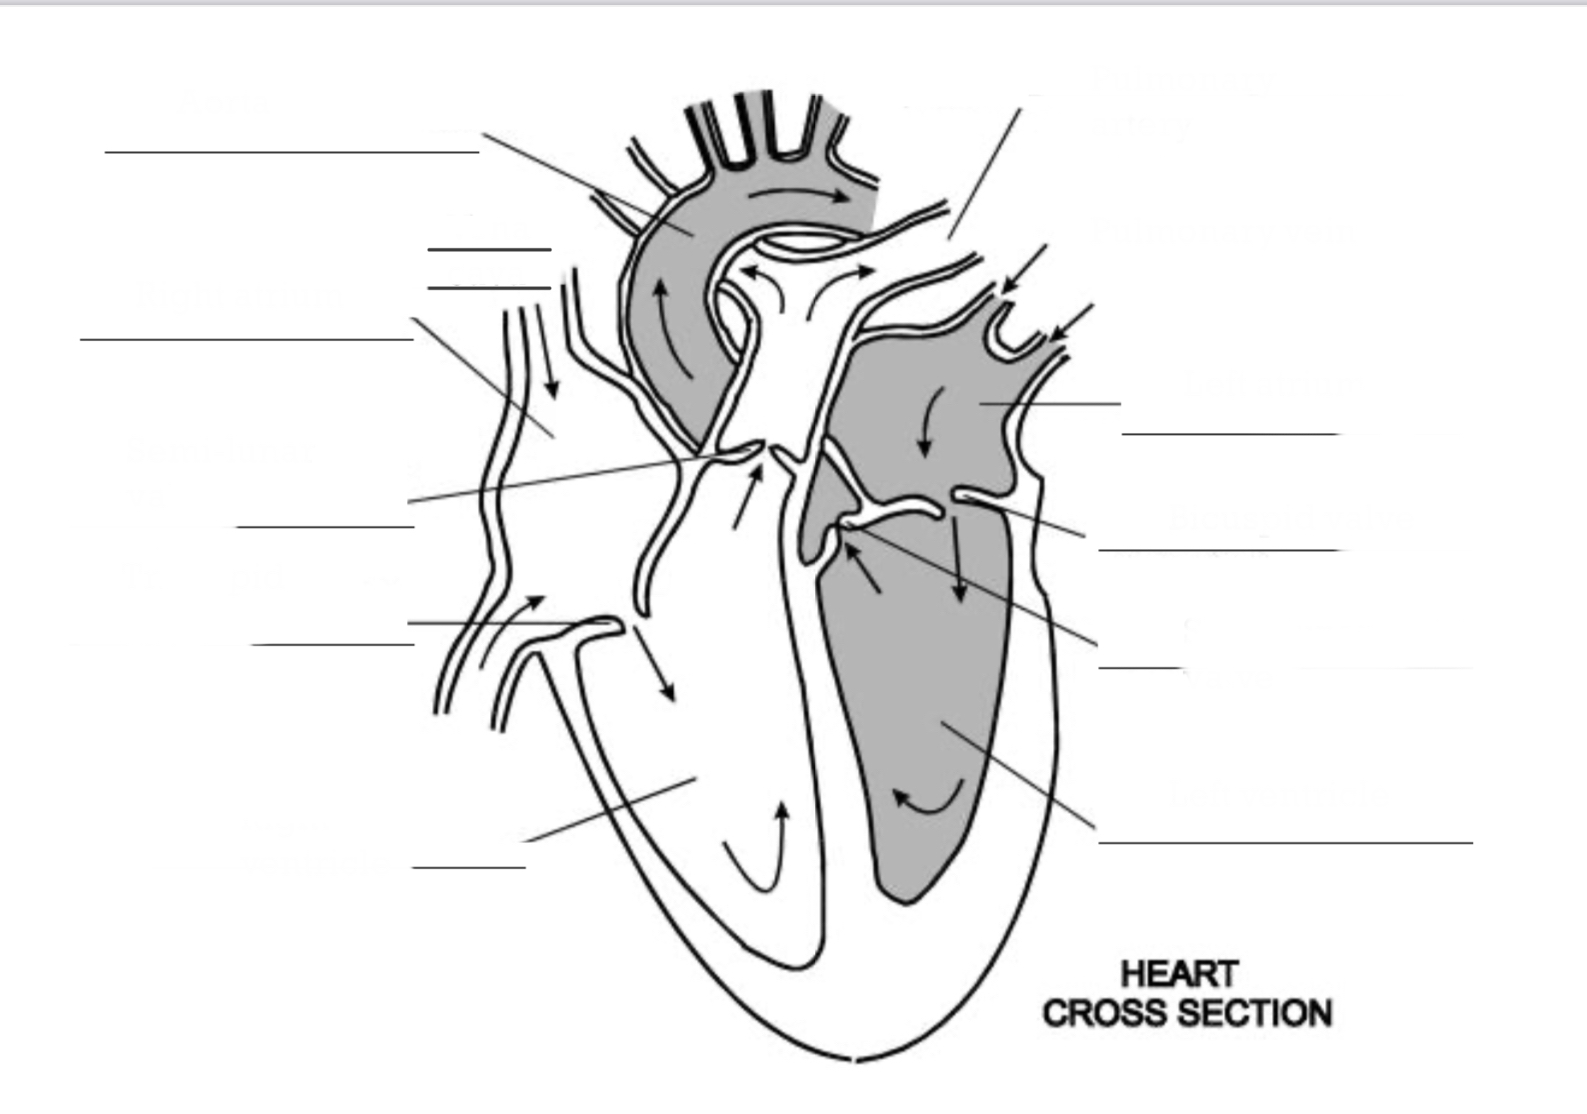 <p>Name the structures the blood would pass through in the heart’s double circulatory system, starting with the Vena Cava.</p>